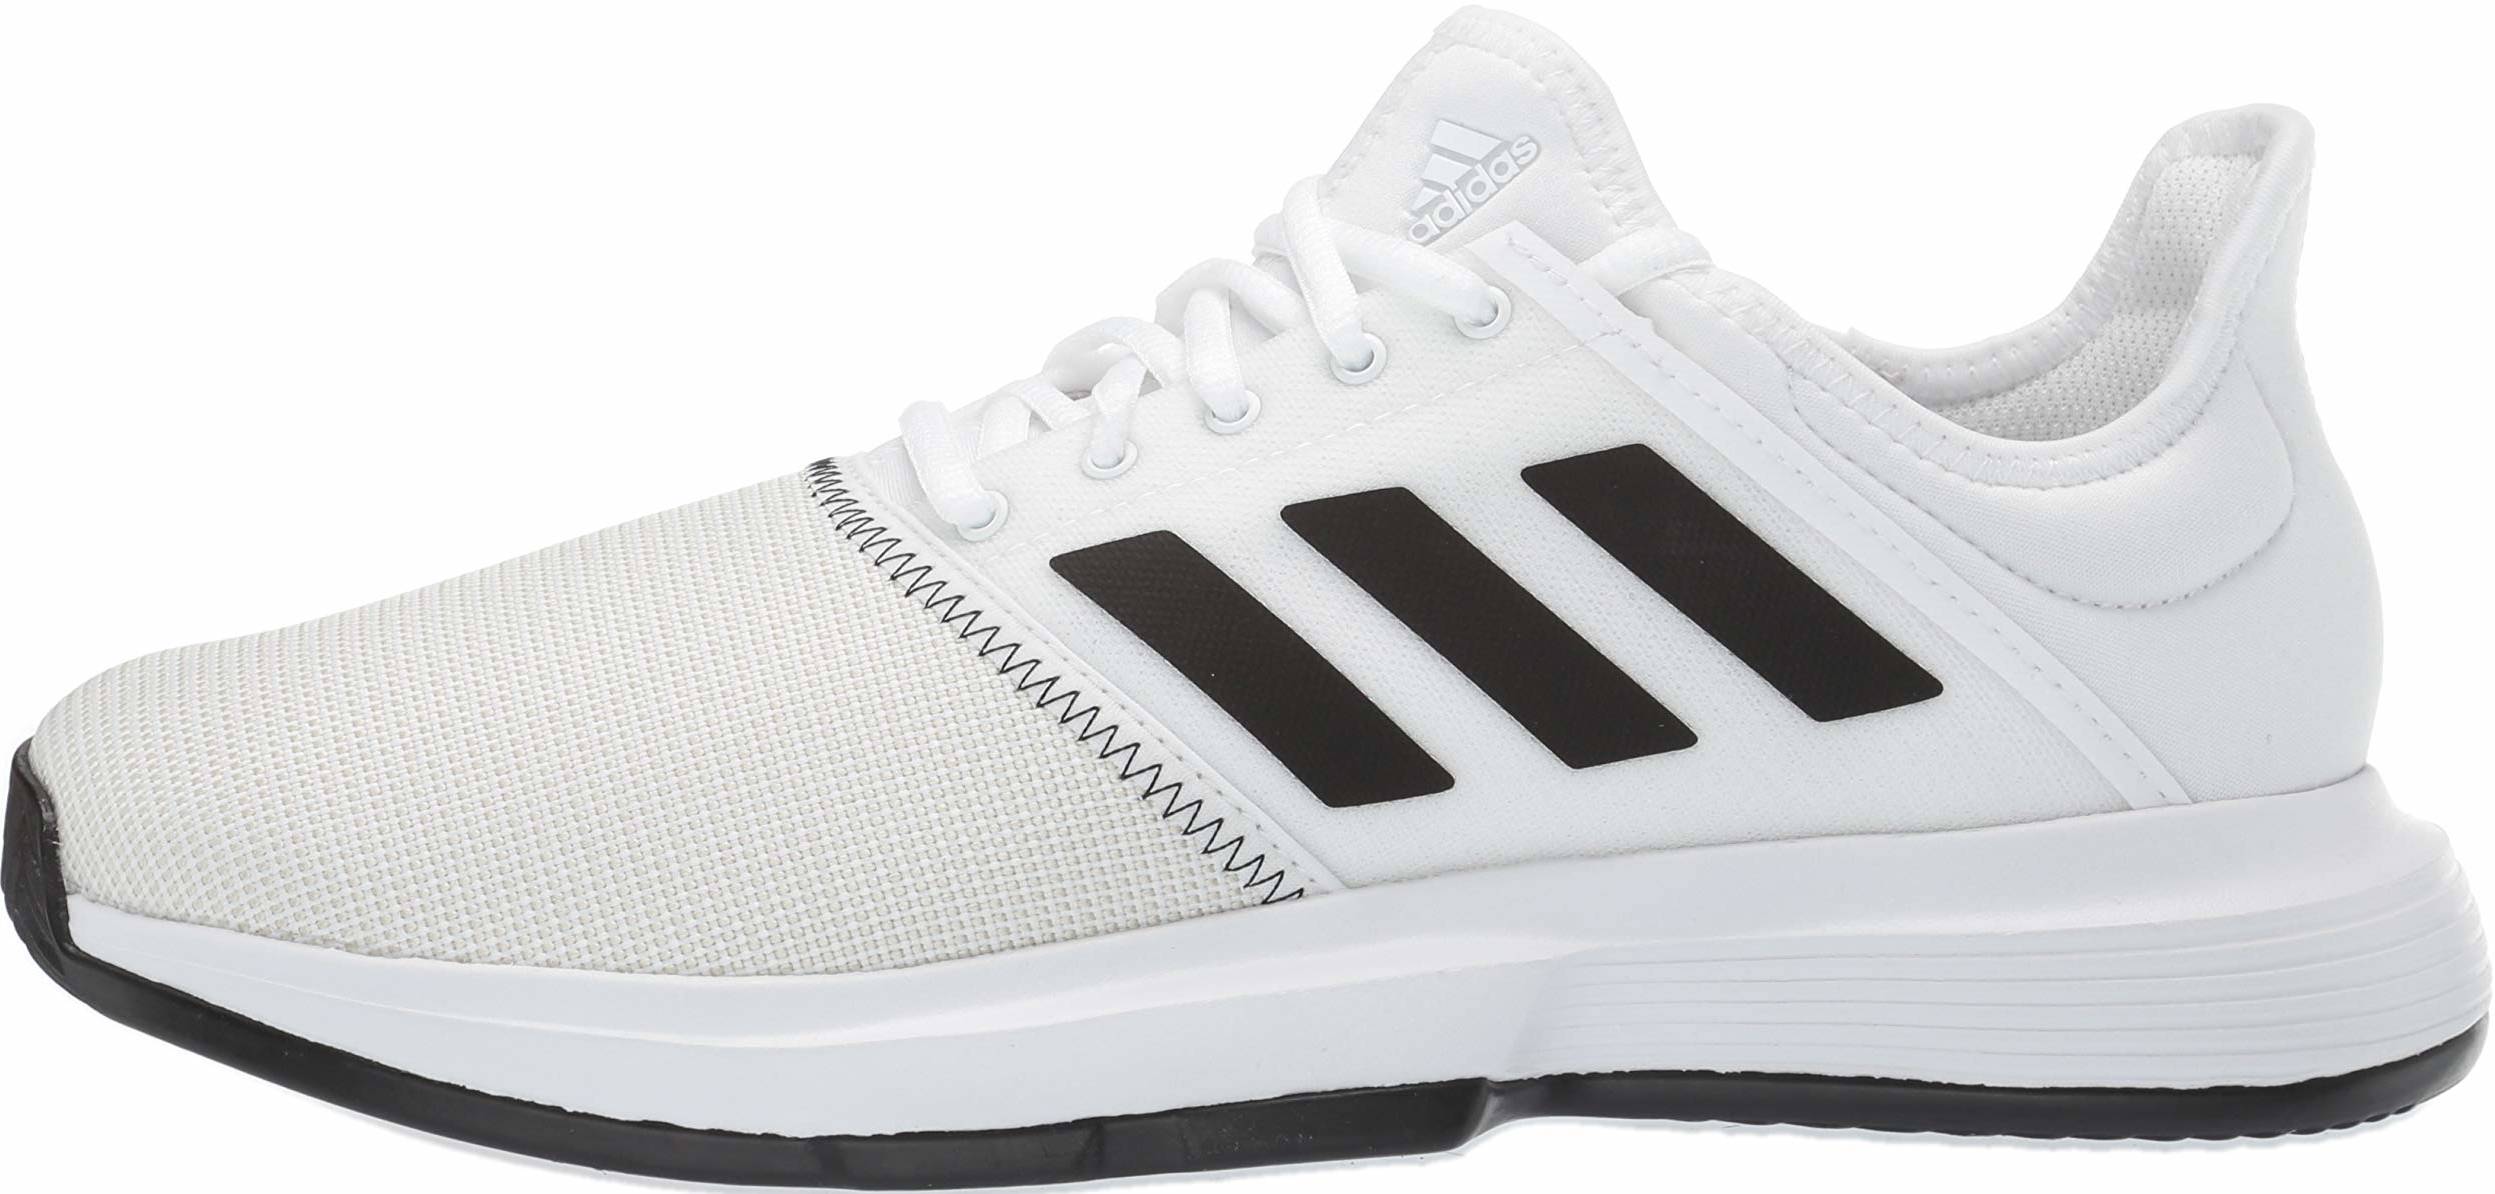 adidas game court tennis shoes review